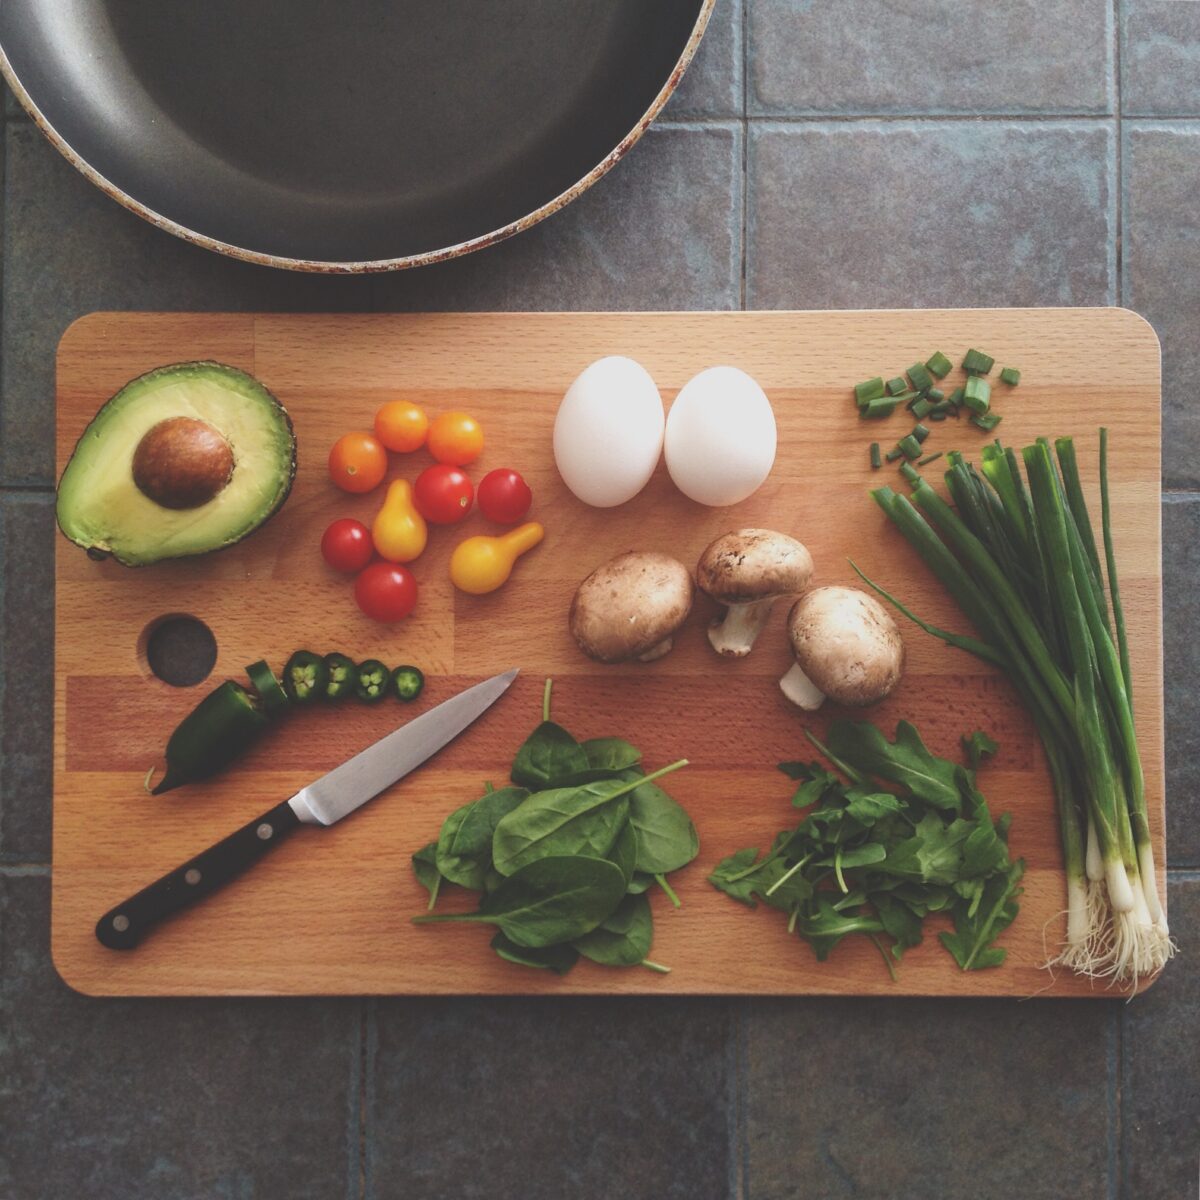 Cutting board with food for a recipe: avocado, egg, spinach